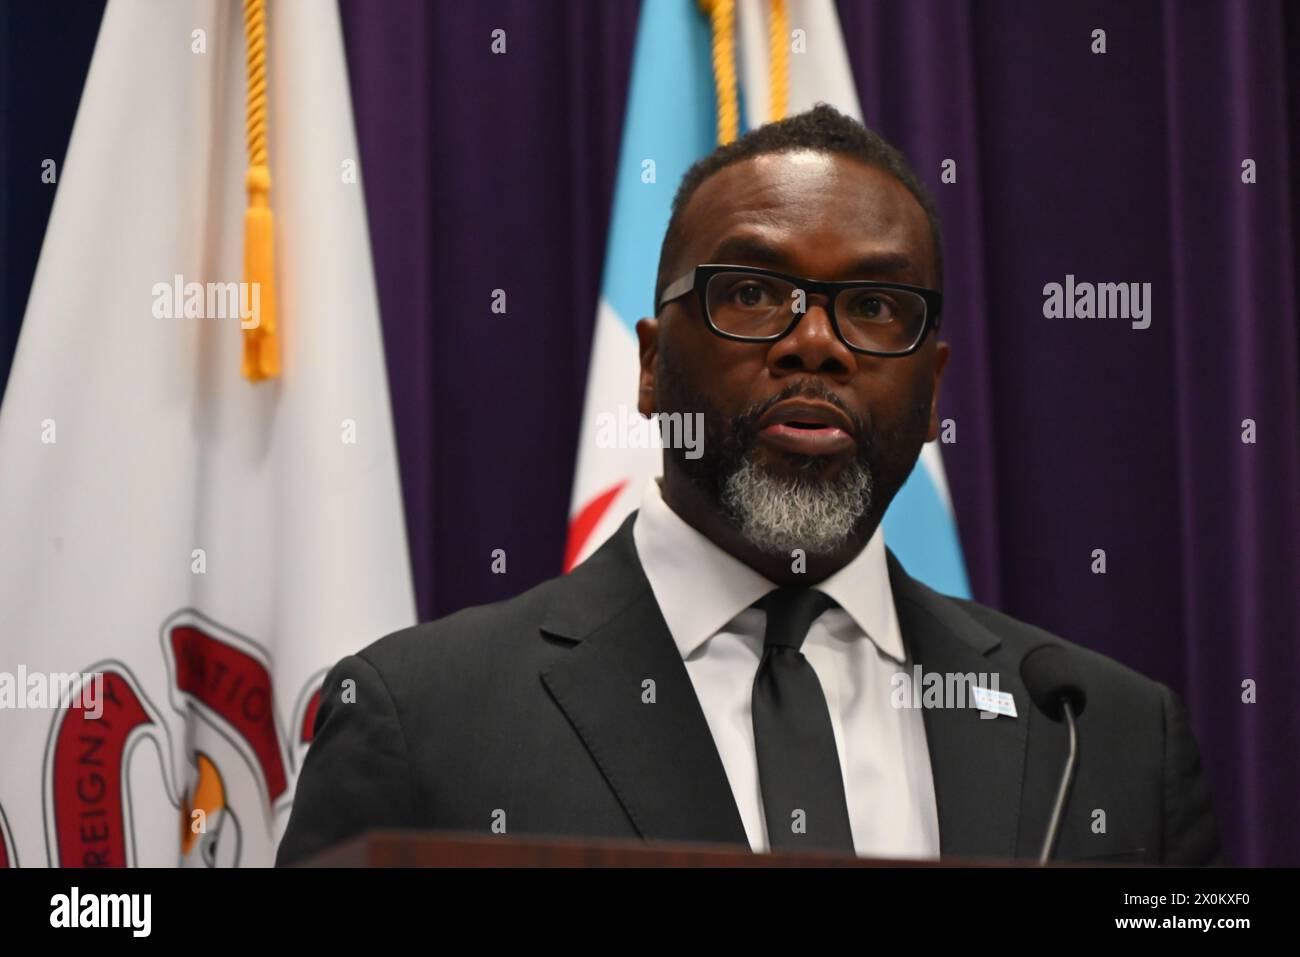 Mayor of Chicago Brandon Johnson attends the news conference and delivers remarks. Chicago Police Department held a news conference to discuss its strategy to address and prevent robberies throughout the City of Chicago in Chicago, Illinois, United States. Stock Photo